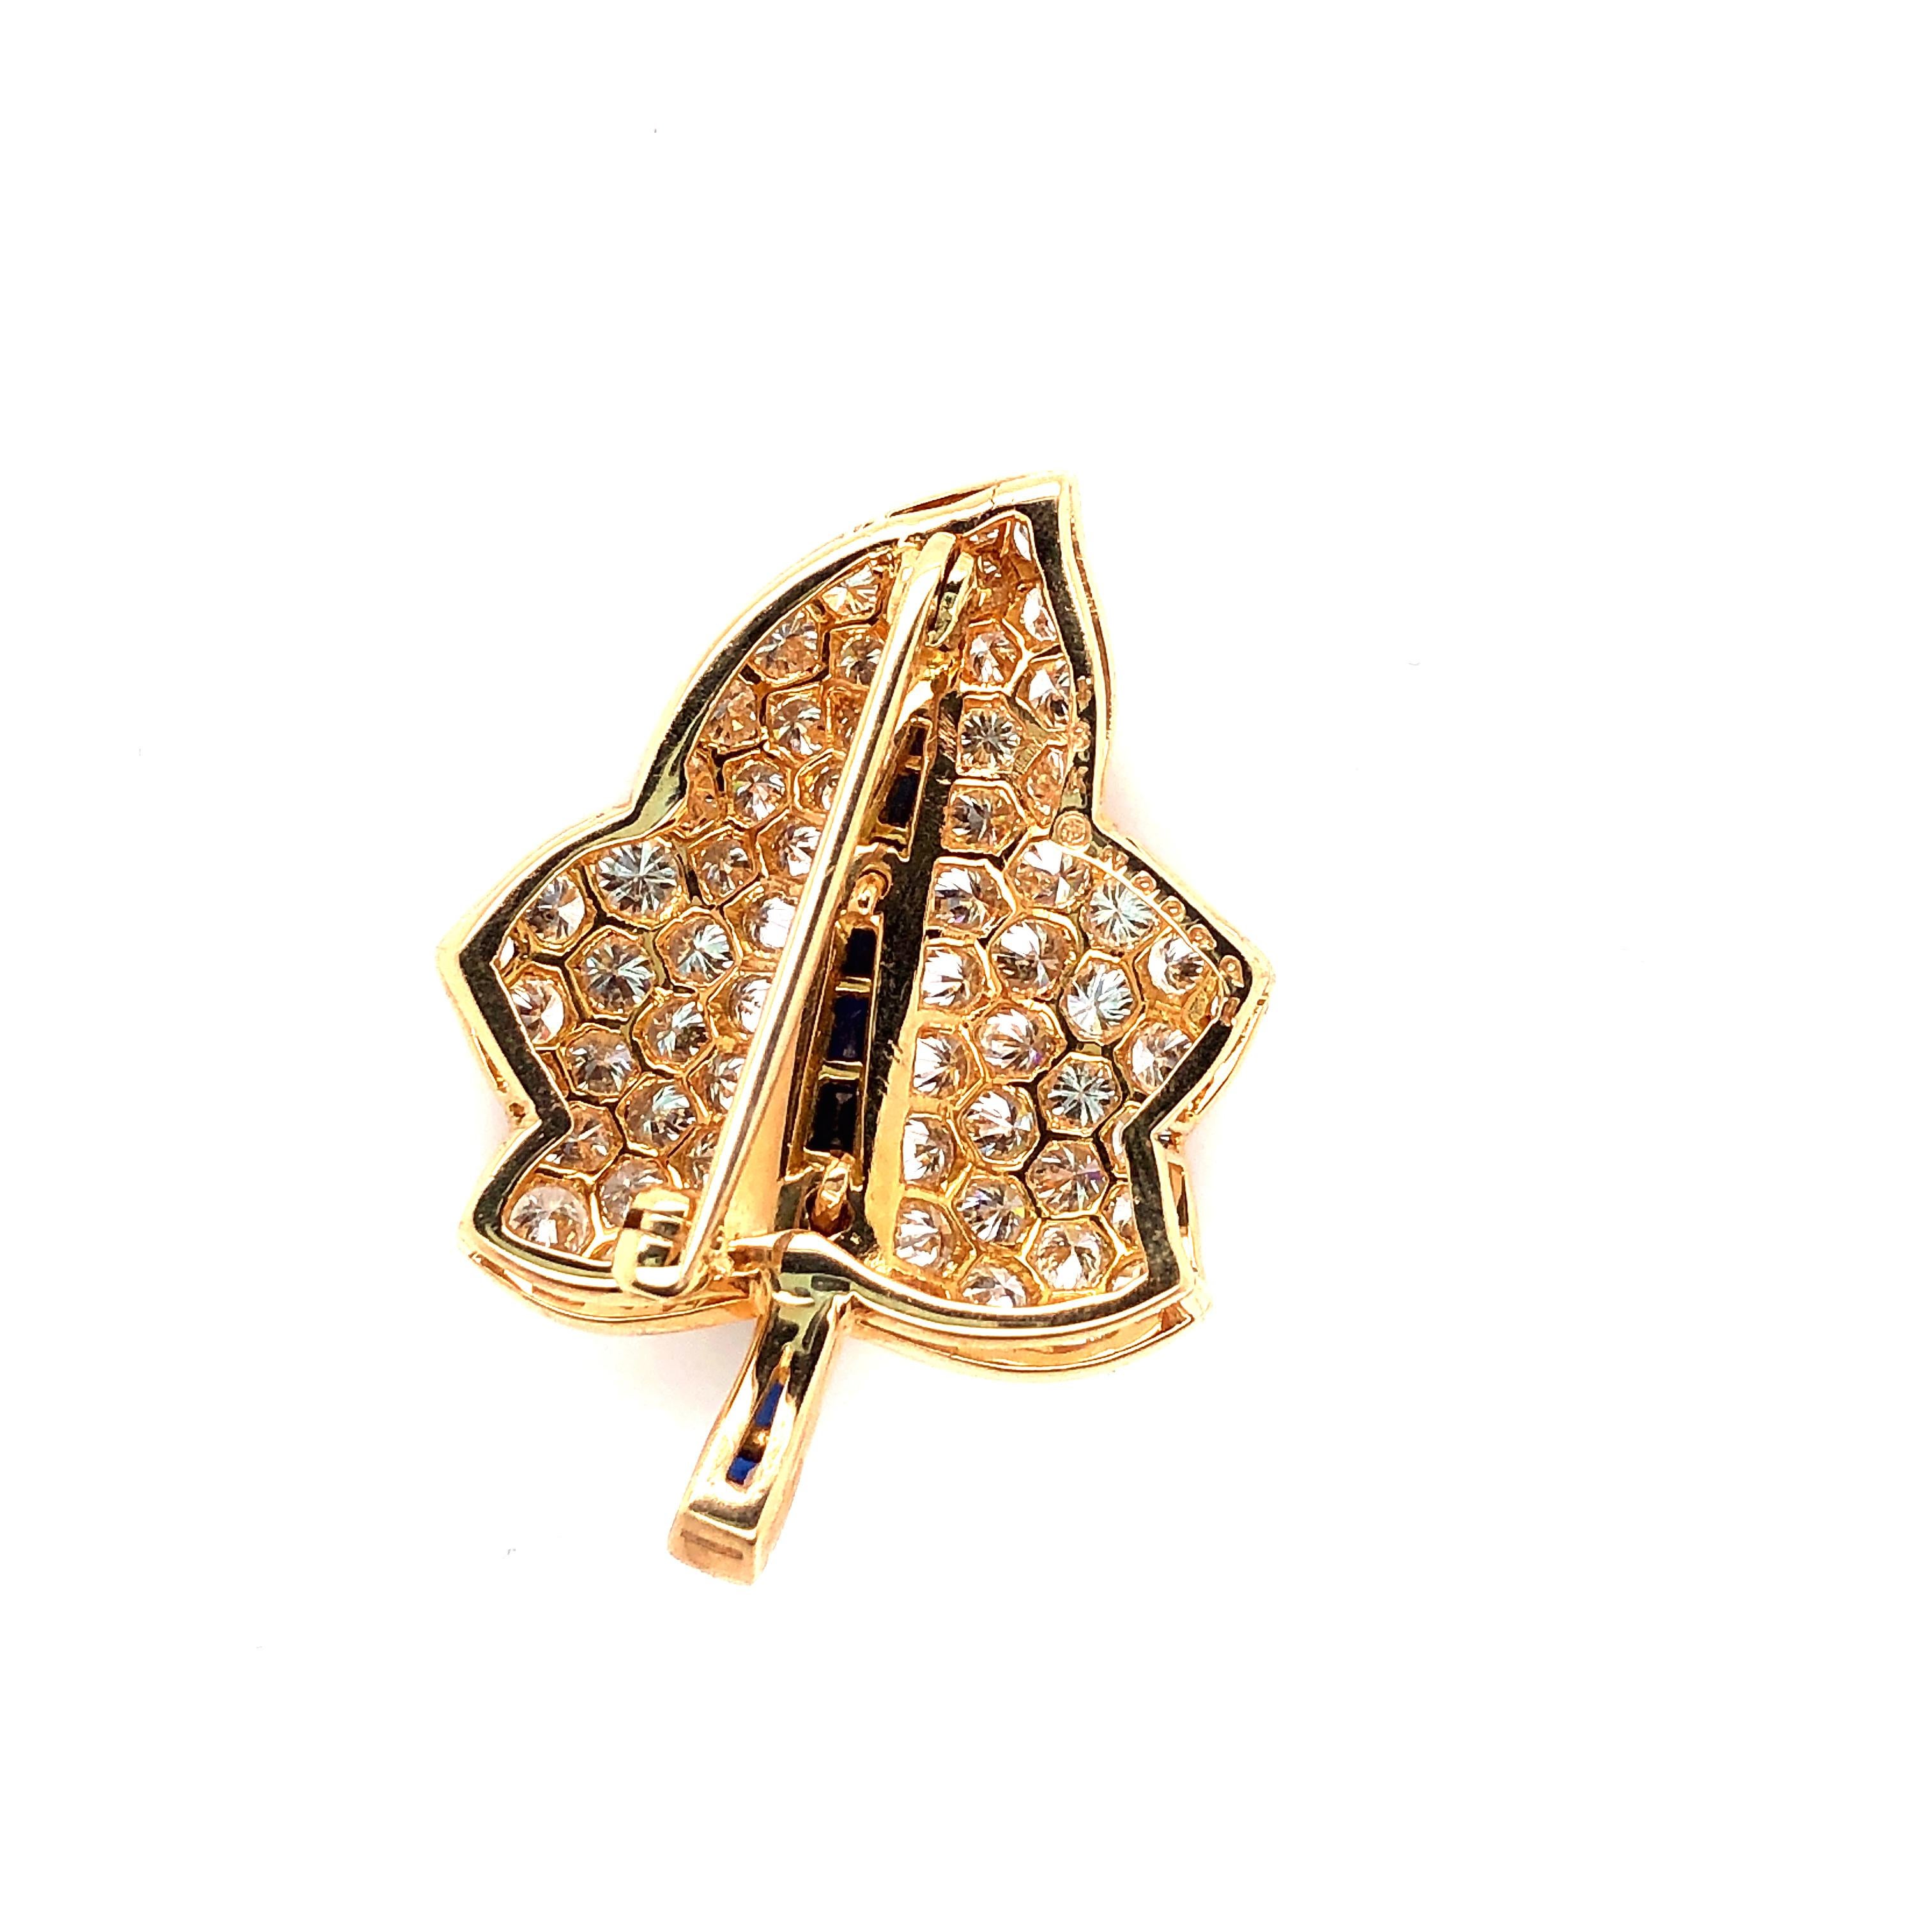 Oscar Heyman 18kt yellow gold maple leaf brooch contains 66 round diamonds weighing 3.23cts (F-G/VS+) and 10 baguette sapphires weighing 0.66cts. It is stamped with the makers mark, 18K, and serial number 200992.

Brooch measures 34mm in length by